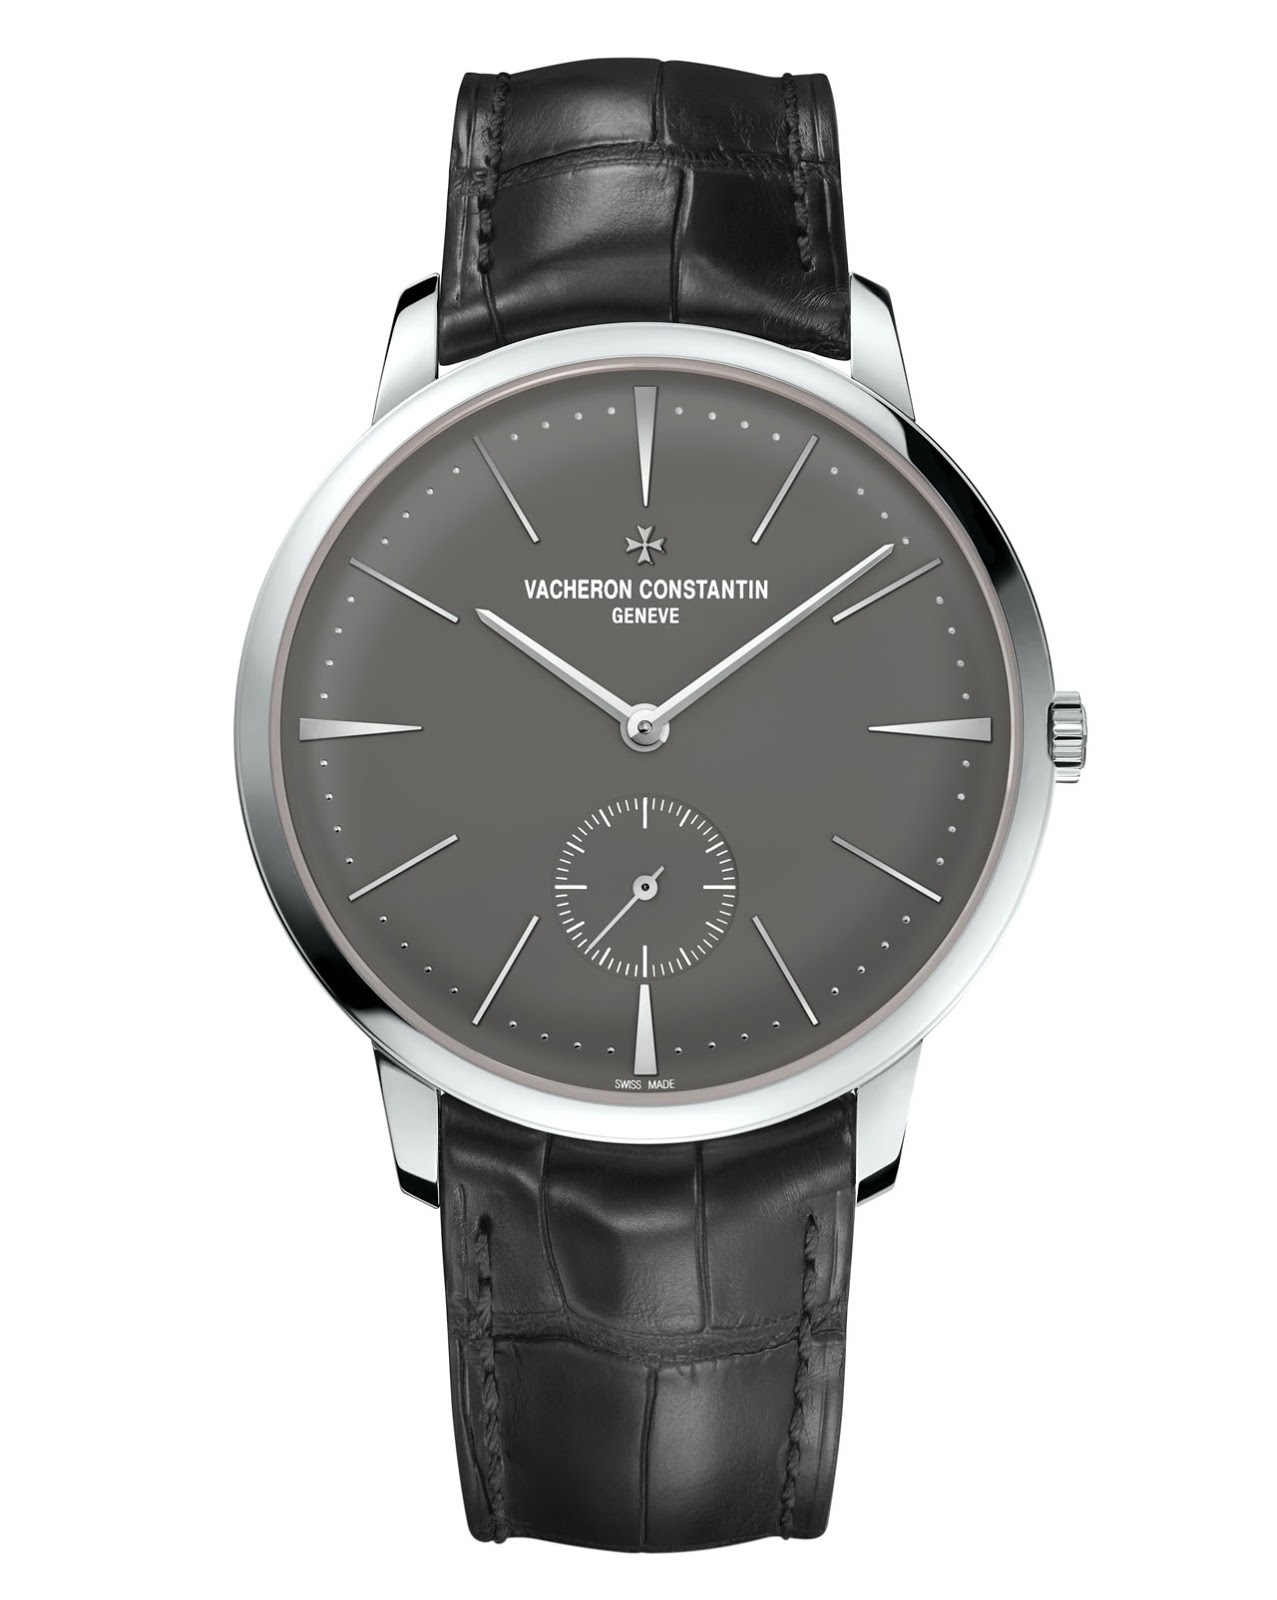 Vacheron Constantin - Patrimony 42 mm | Time and Watches | The watch blog